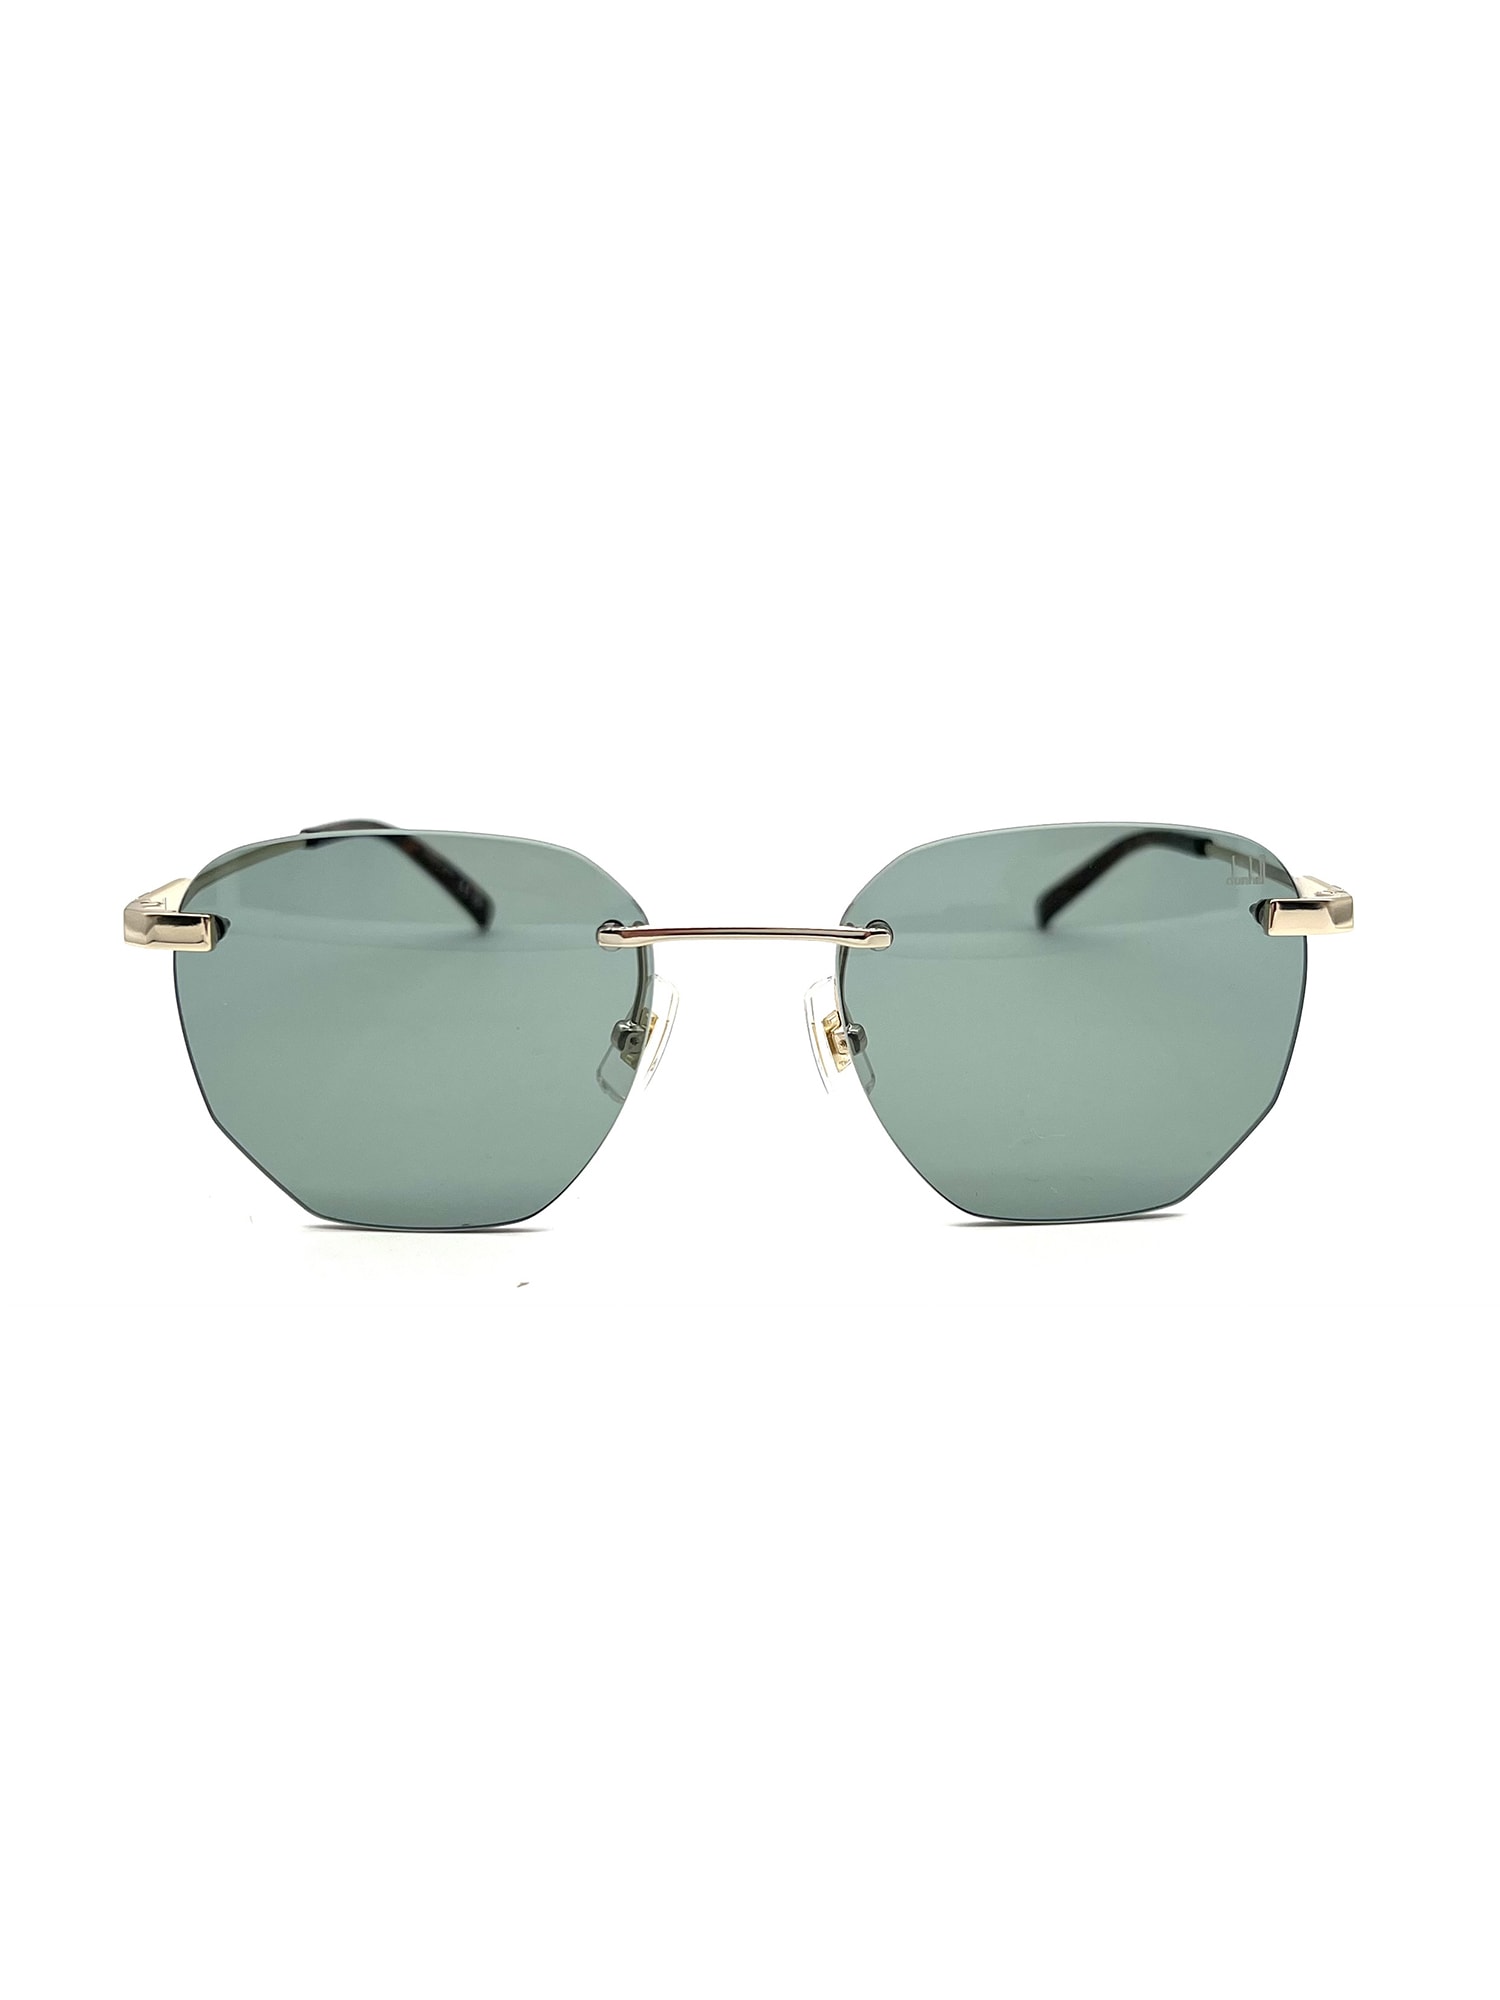 Dunhill Du0066s Sunglasses In Gold Gold Green